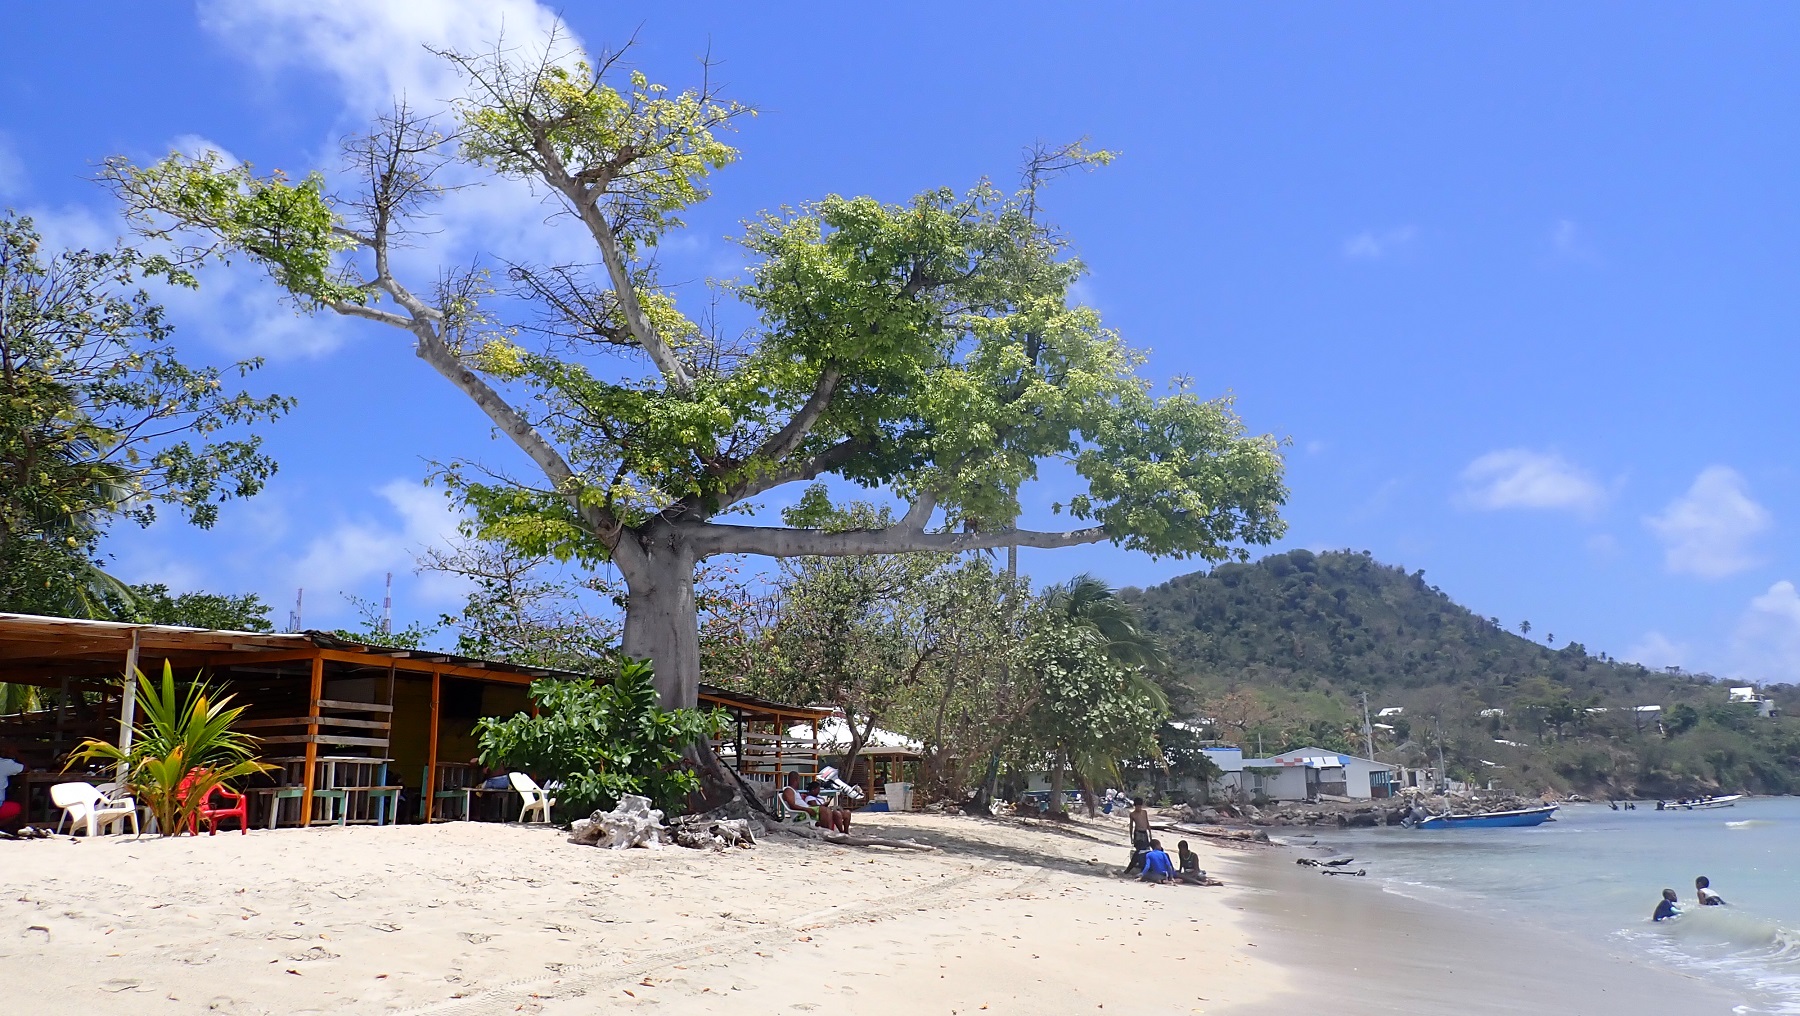 Popular Southwest Bay has sheltered sand beaches with hostels and restaurants. 